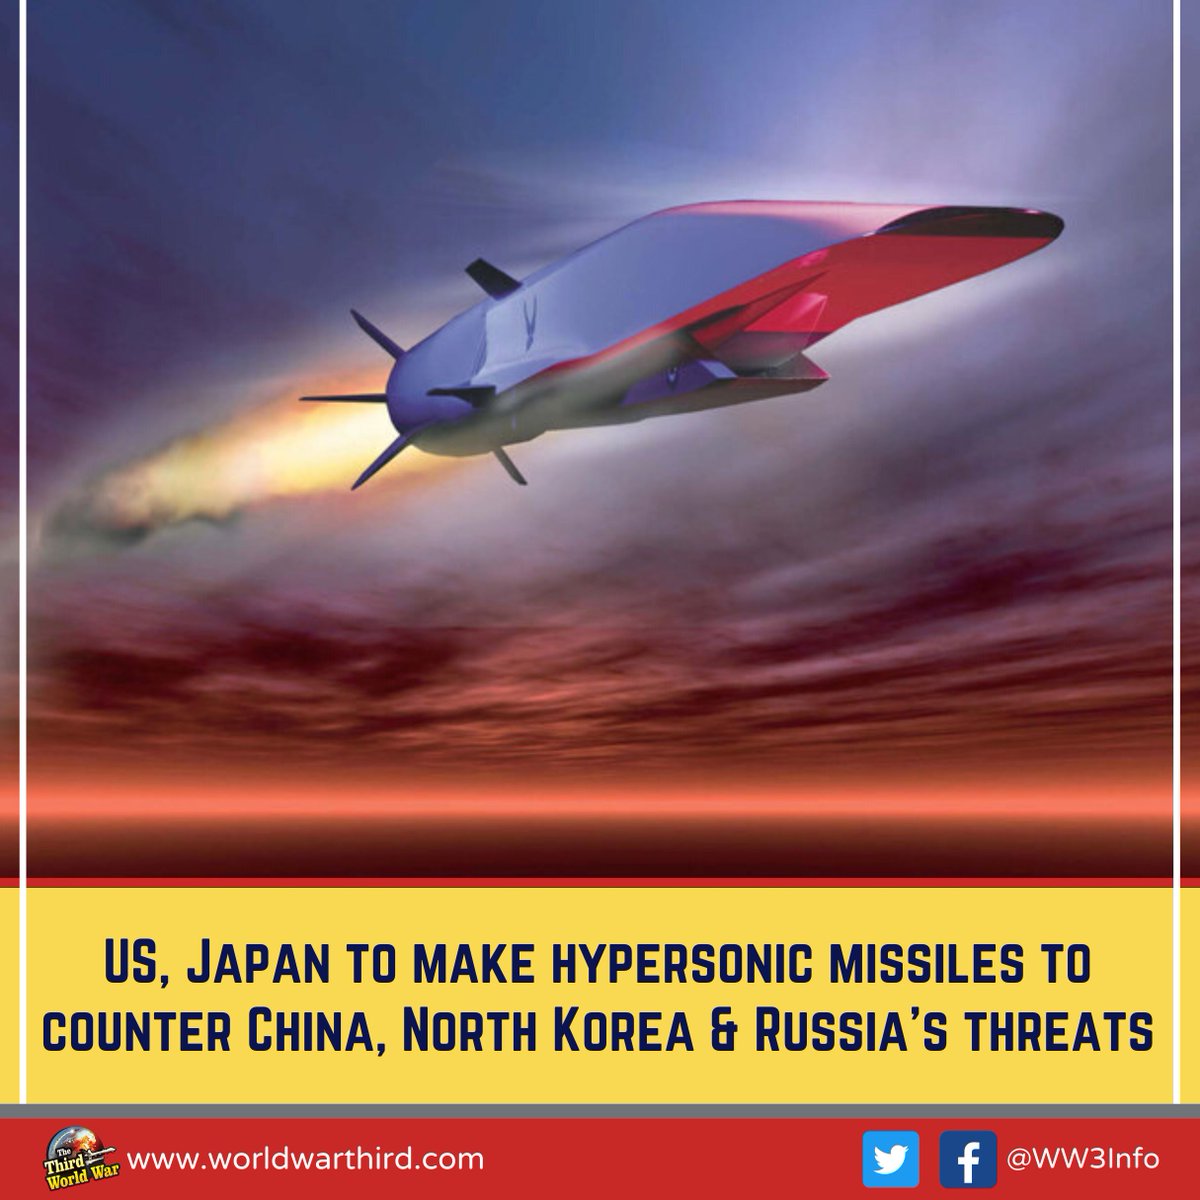 #WWIII: US & Japan will make #HypersonicMissile to counter China, #NorthKorea & Russia's threats. President Biden & PM Kishida will go to #CampDavid with South Korean President Yoon Suk Yeol to discuss the security issue of China & the Indo-Pacific region. worldwarthird.com/index.php/2023…